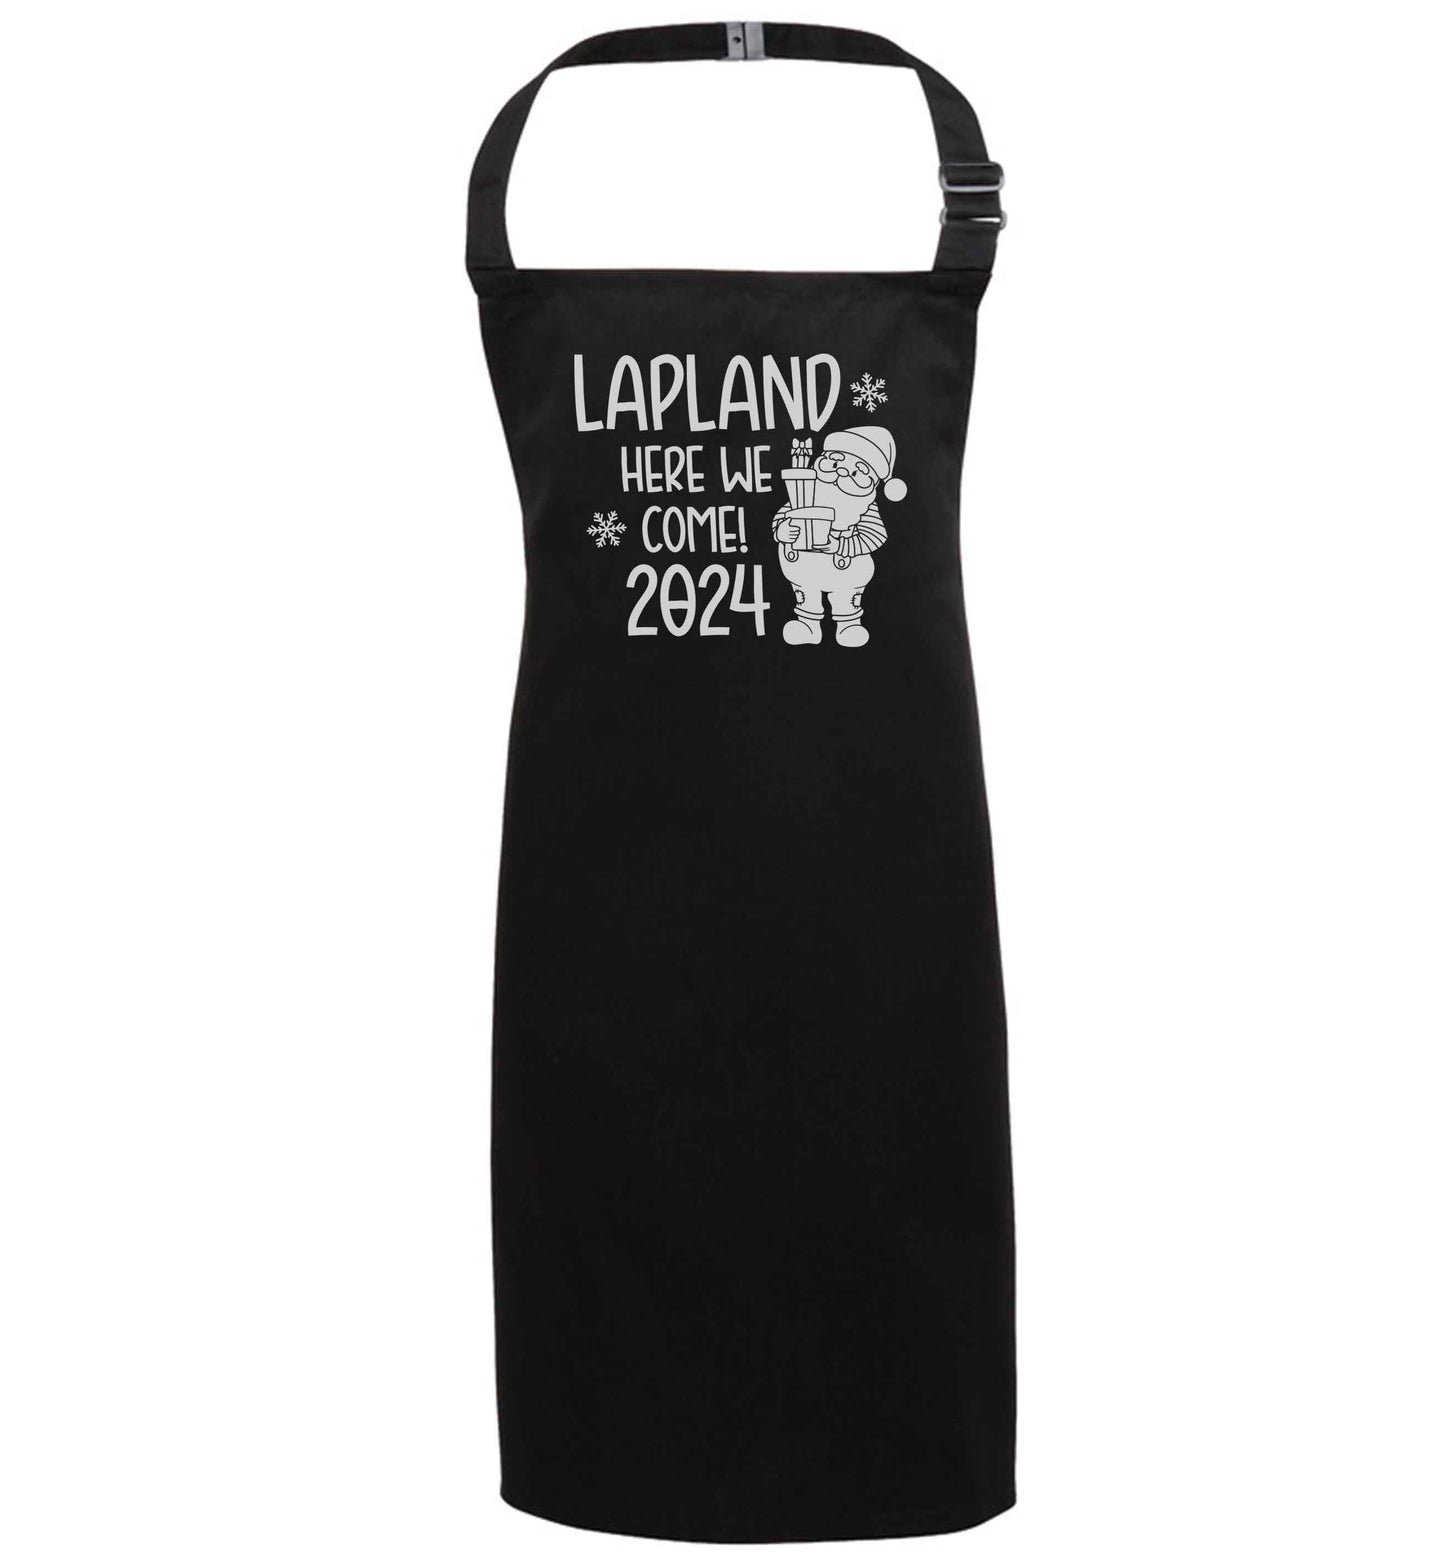 Lapland here we come black apron 7-10 years